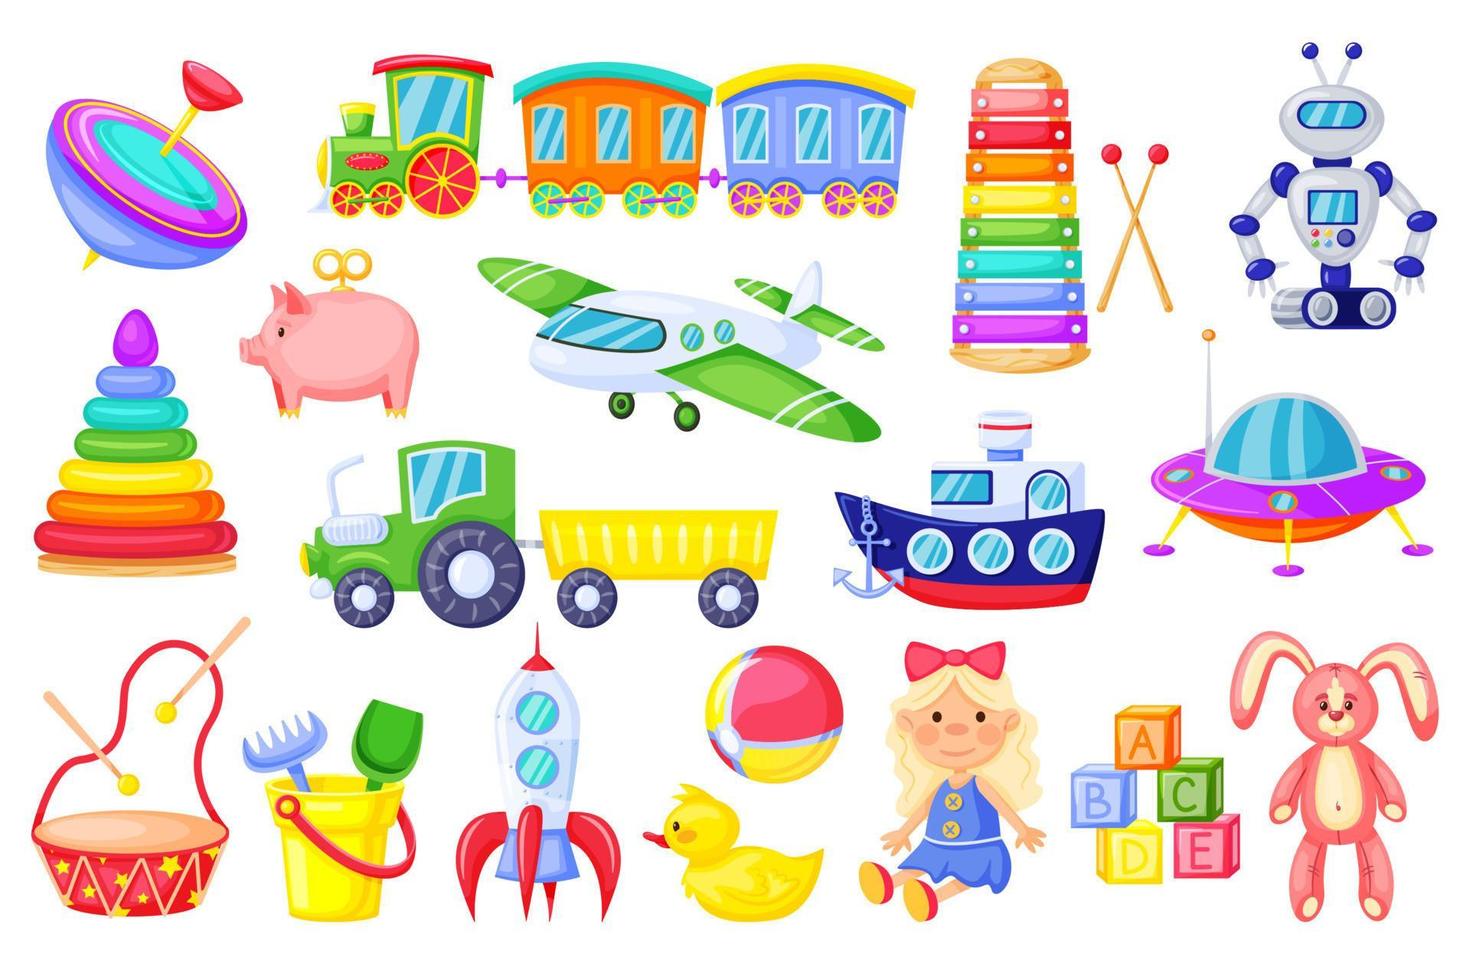 Kids toys. Cartoon rocket, ship, train, cute girl doll, duck, plush bunny, alphabet cubes. Colorful plastic toy for toddlers vector set